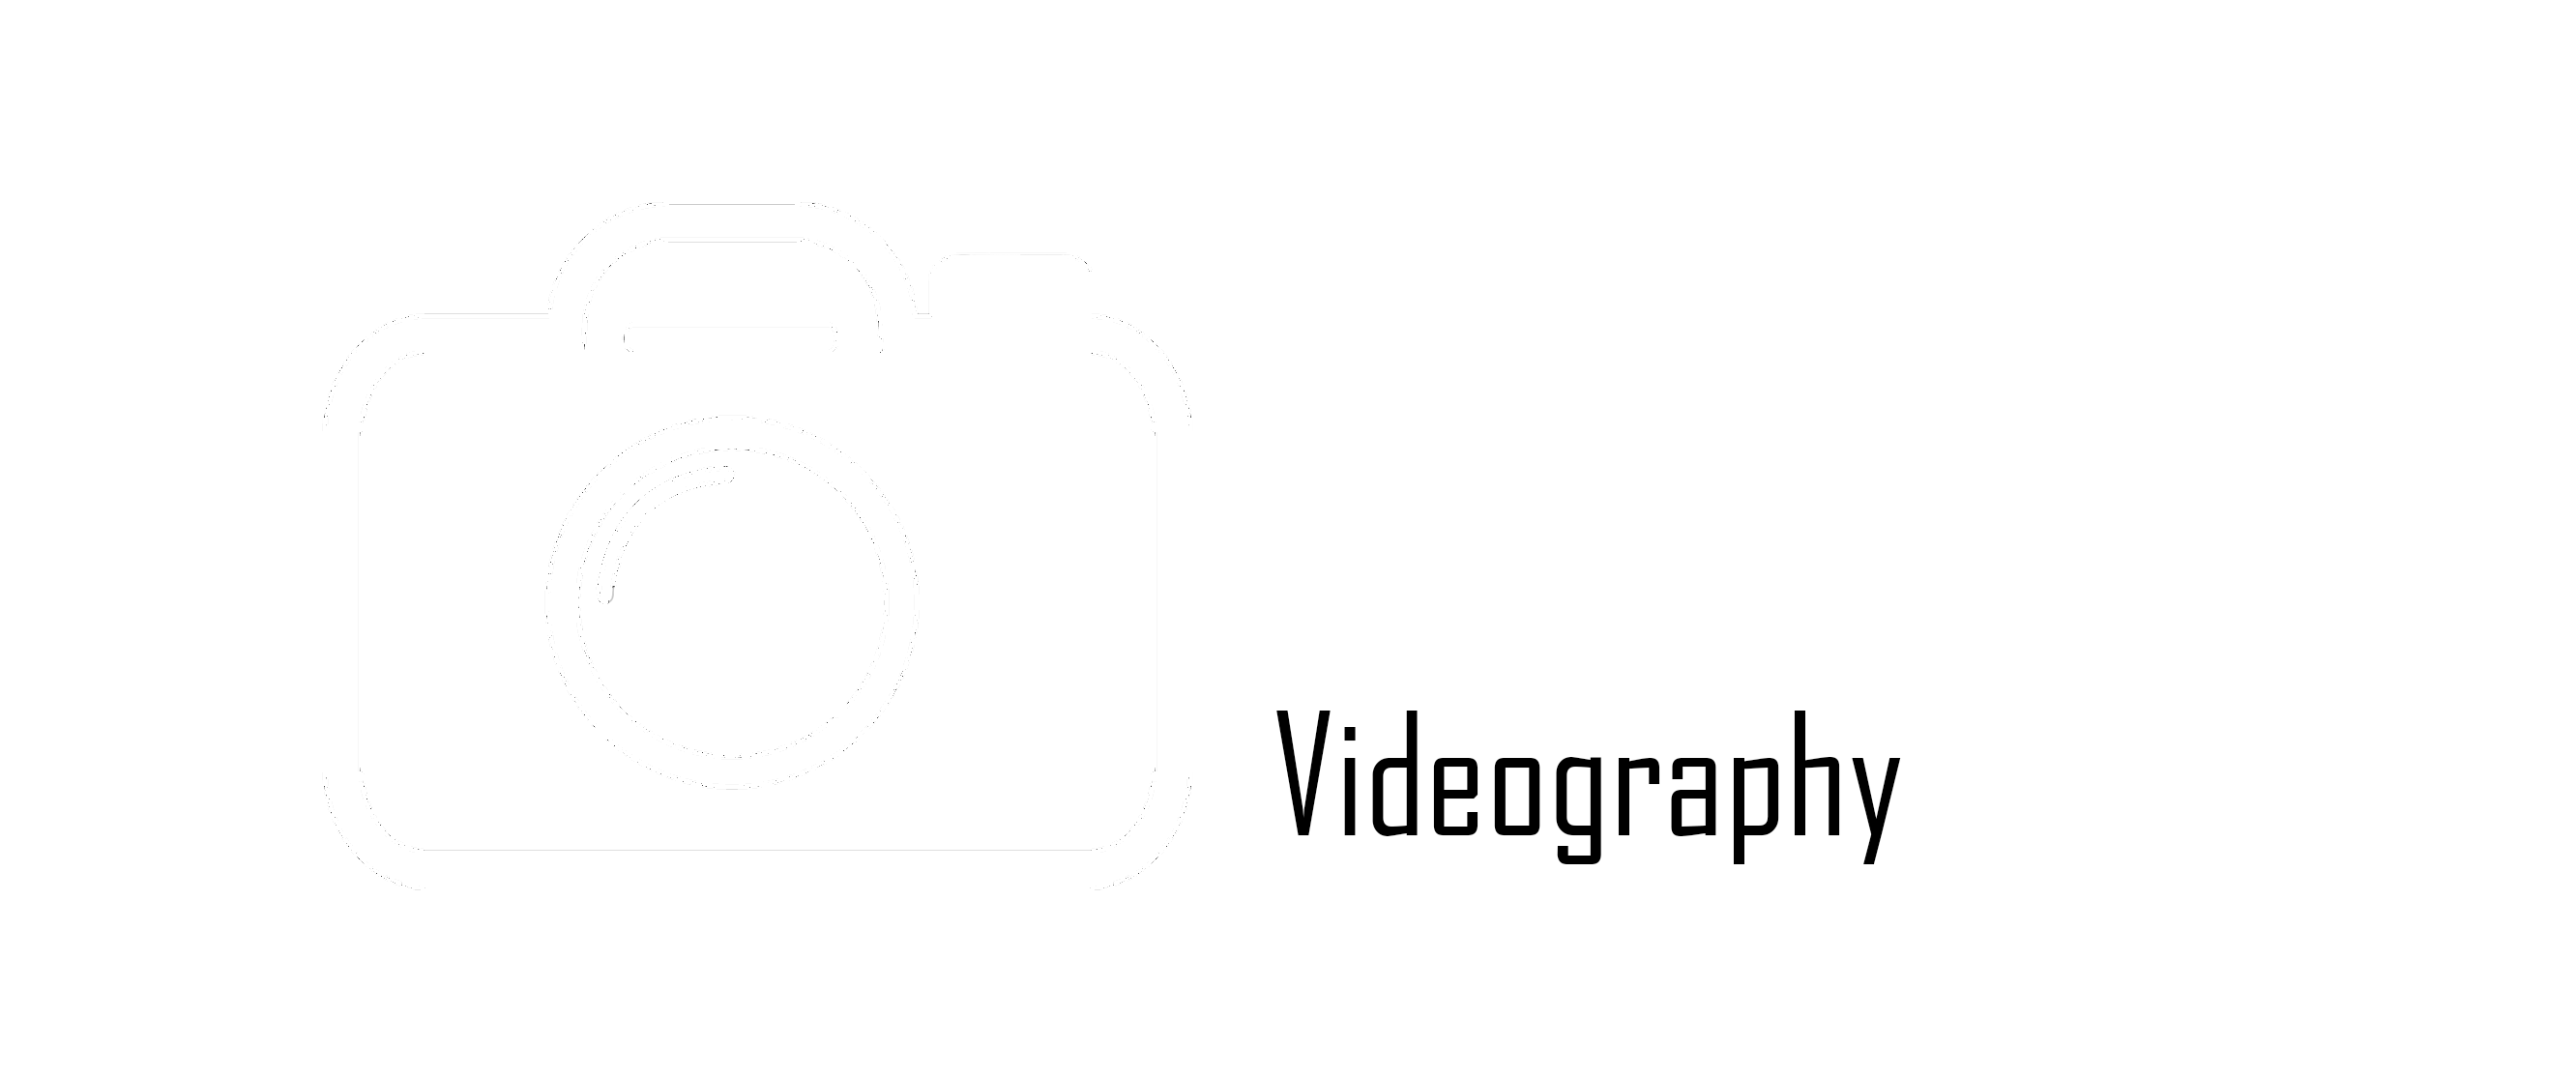 Photography & Videography services on Rhodes island